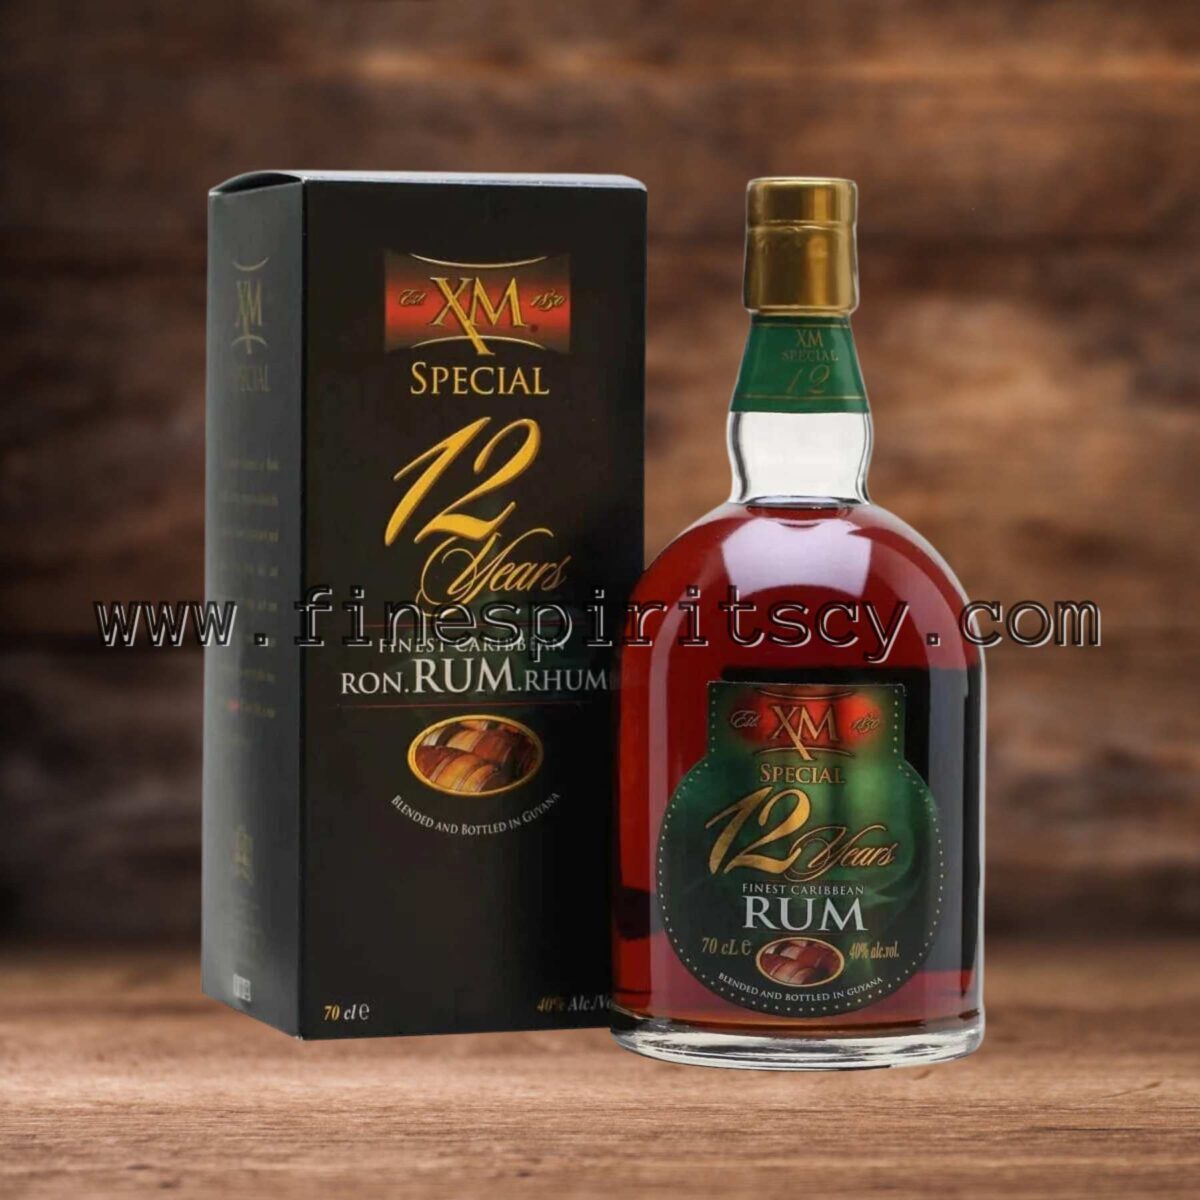 XM Special 12 Years Old Caribbean Rum